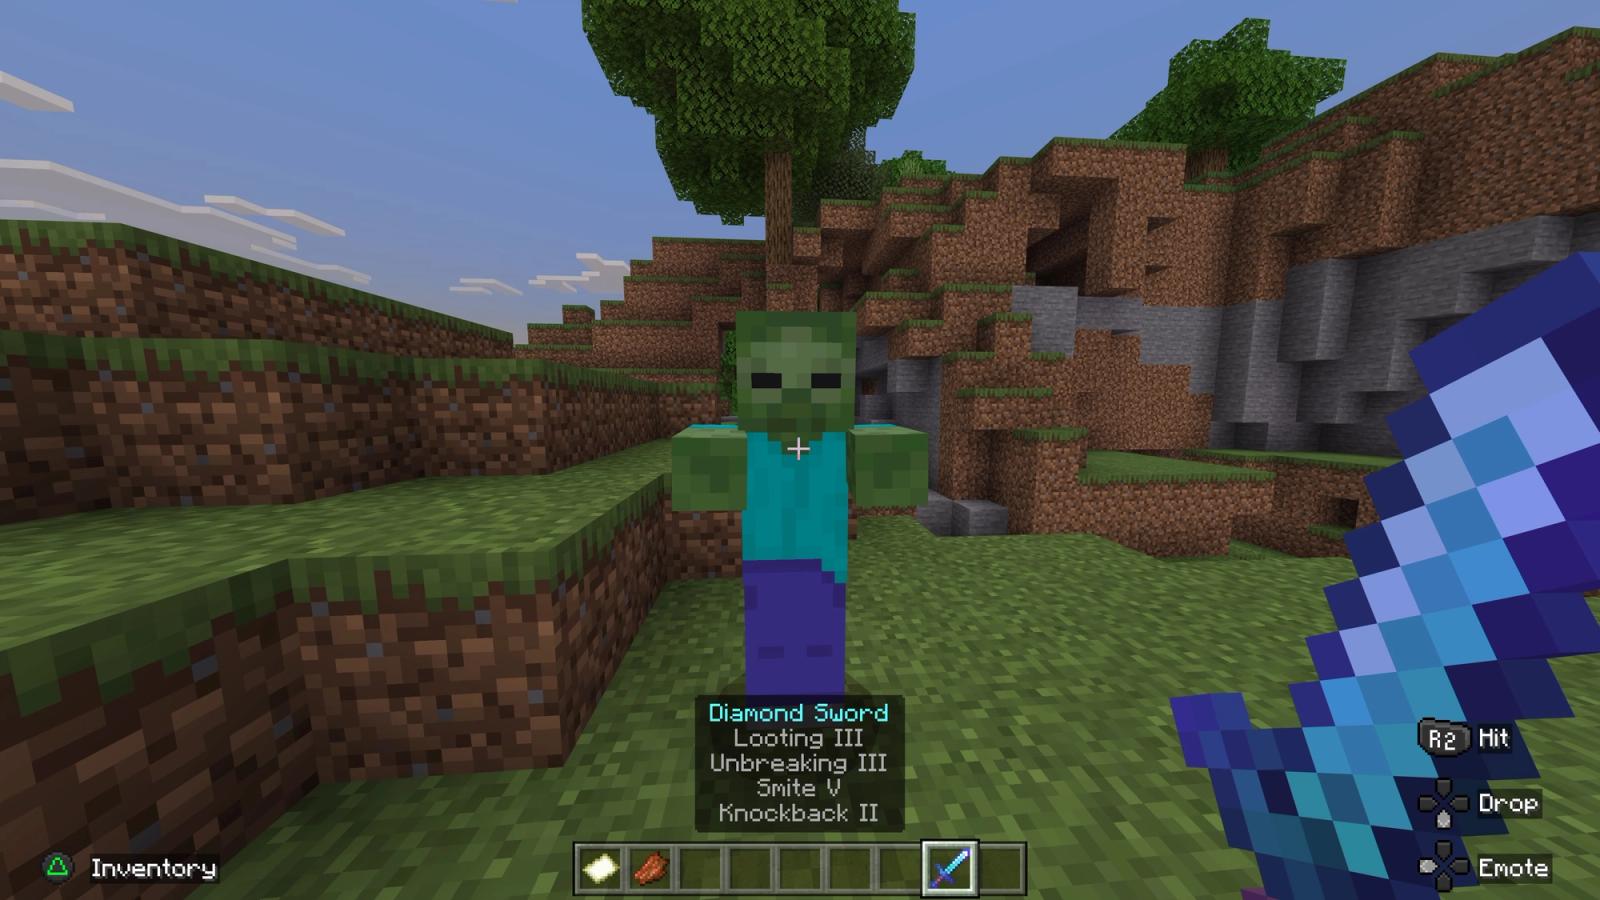 A Minecraft Zombie faces the player, who wields a diamond sword